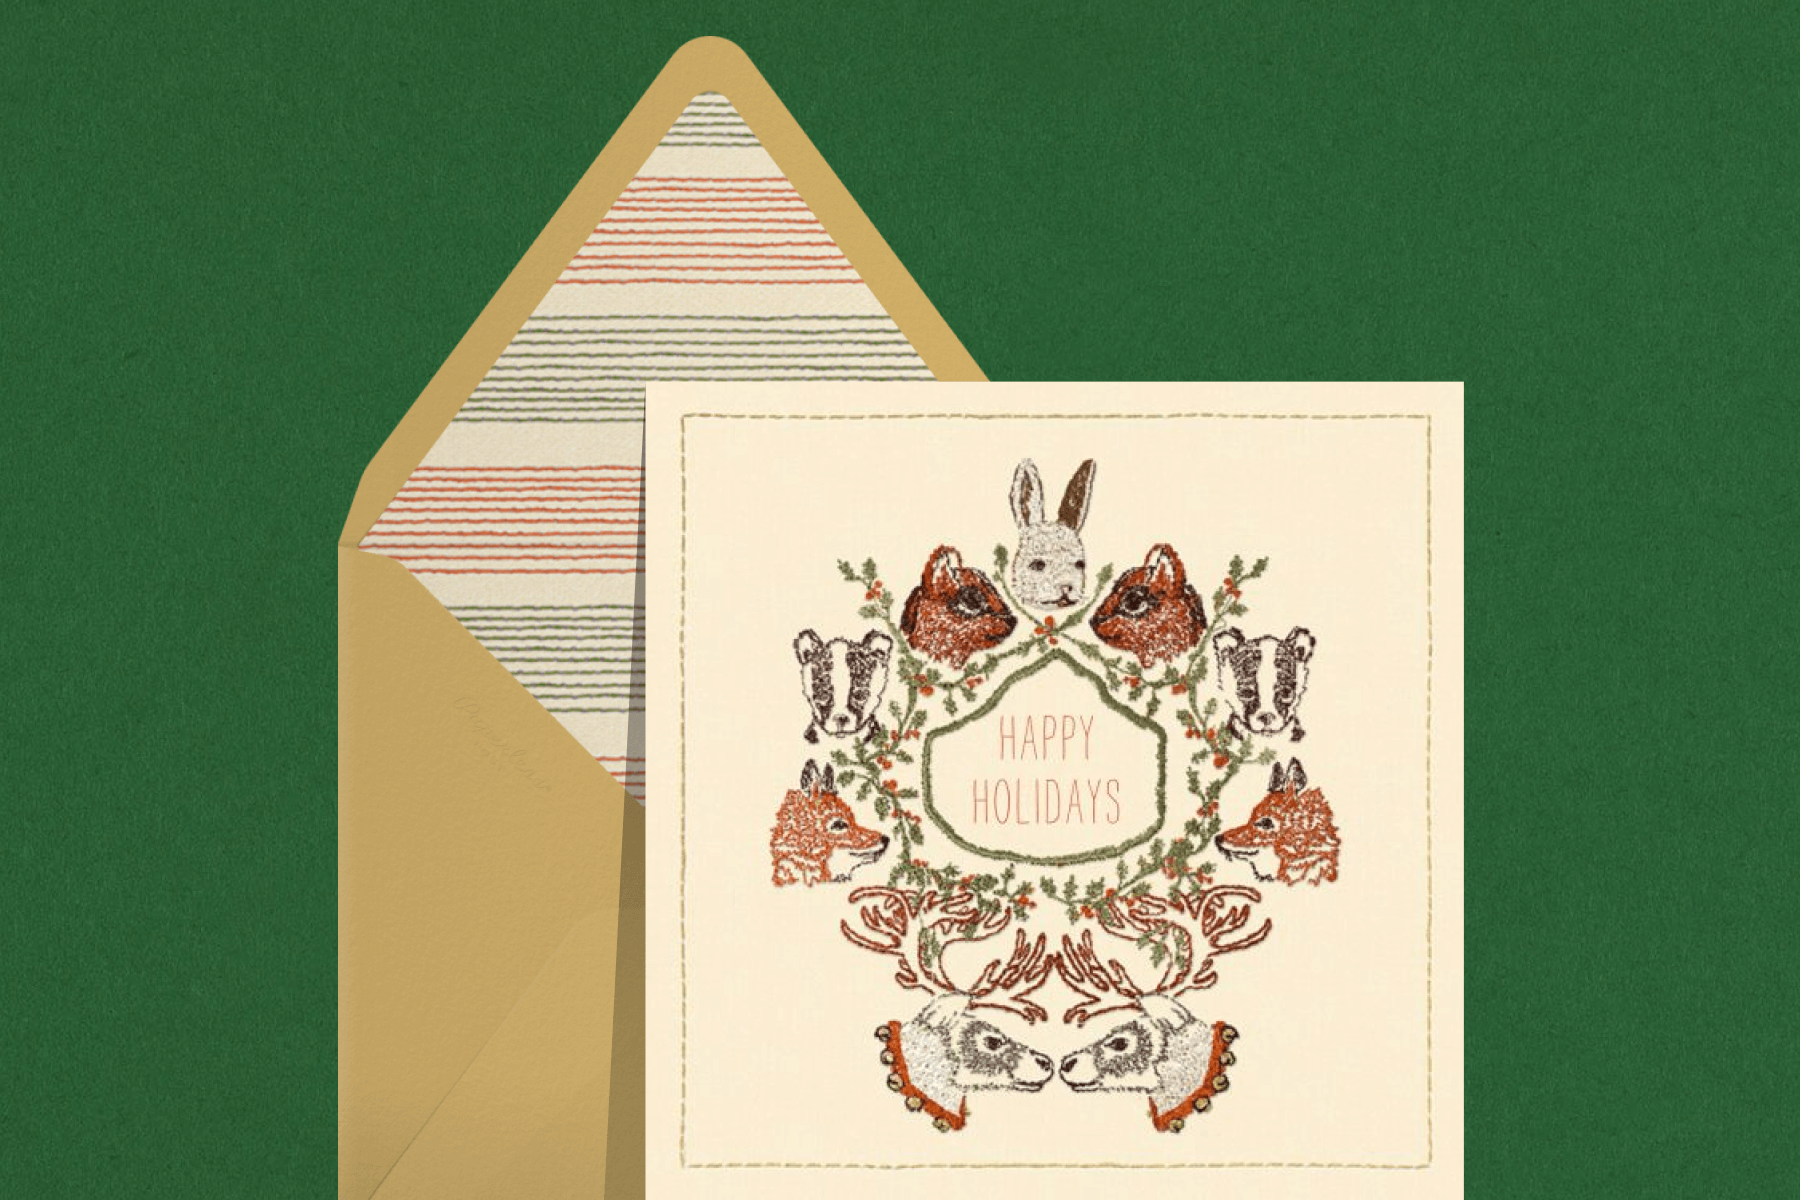 A holiday card with embroidered woodland animal faces including a rabbit, chipmunks, badgers, foxes, and deer in a circle.